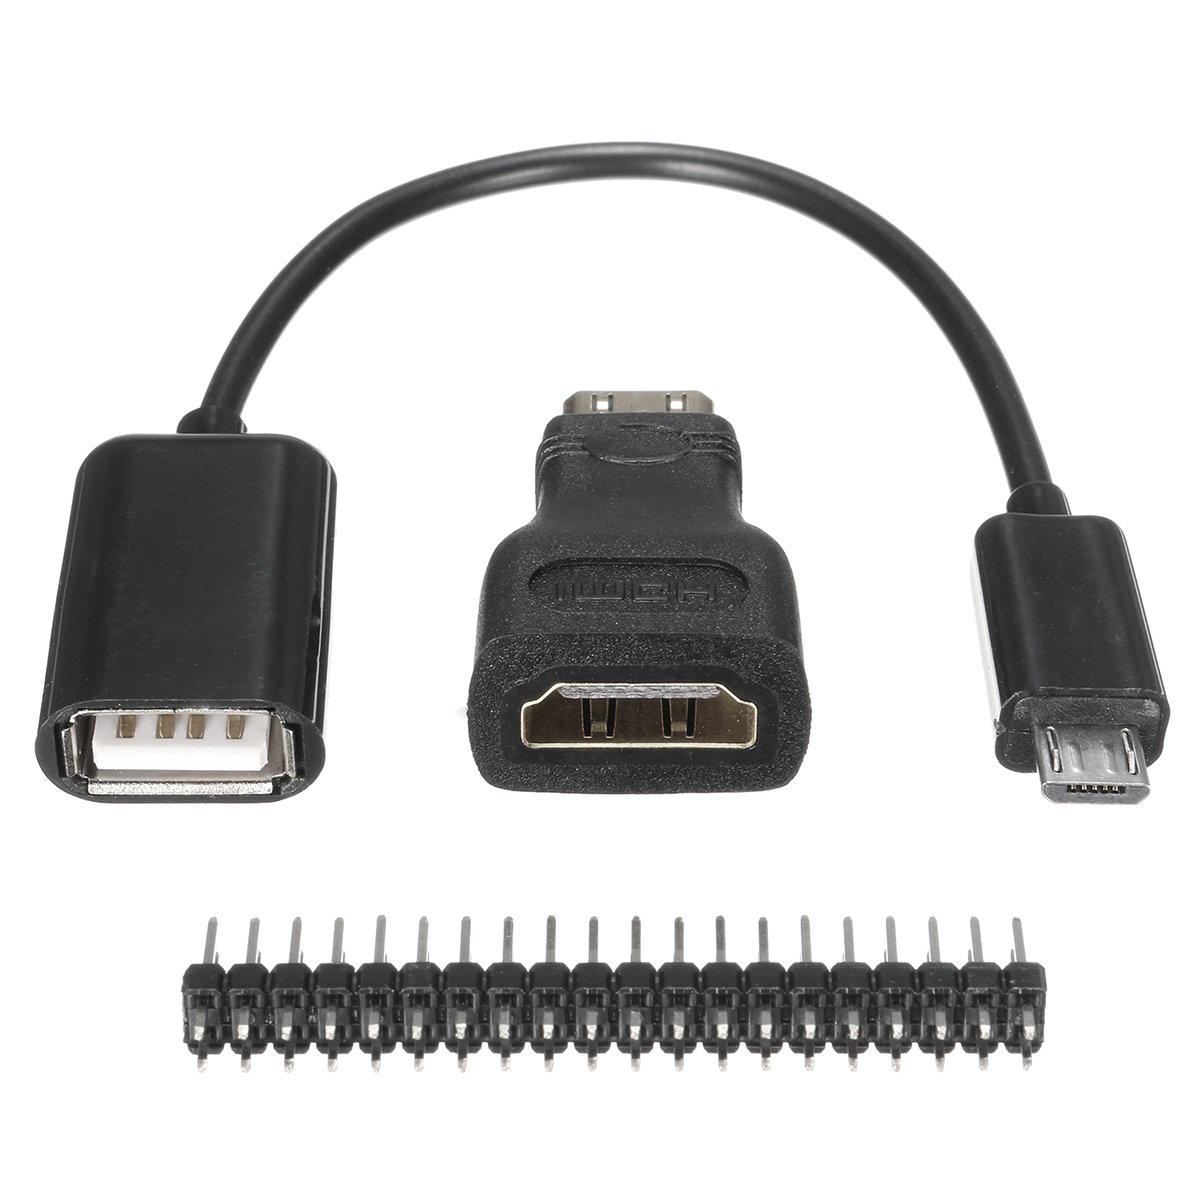 3 in 1 Mini HD to HD Adapter+Micro USB to USB Female Power Cable+40P Pin Kits For Raspberry Pi Zero 2